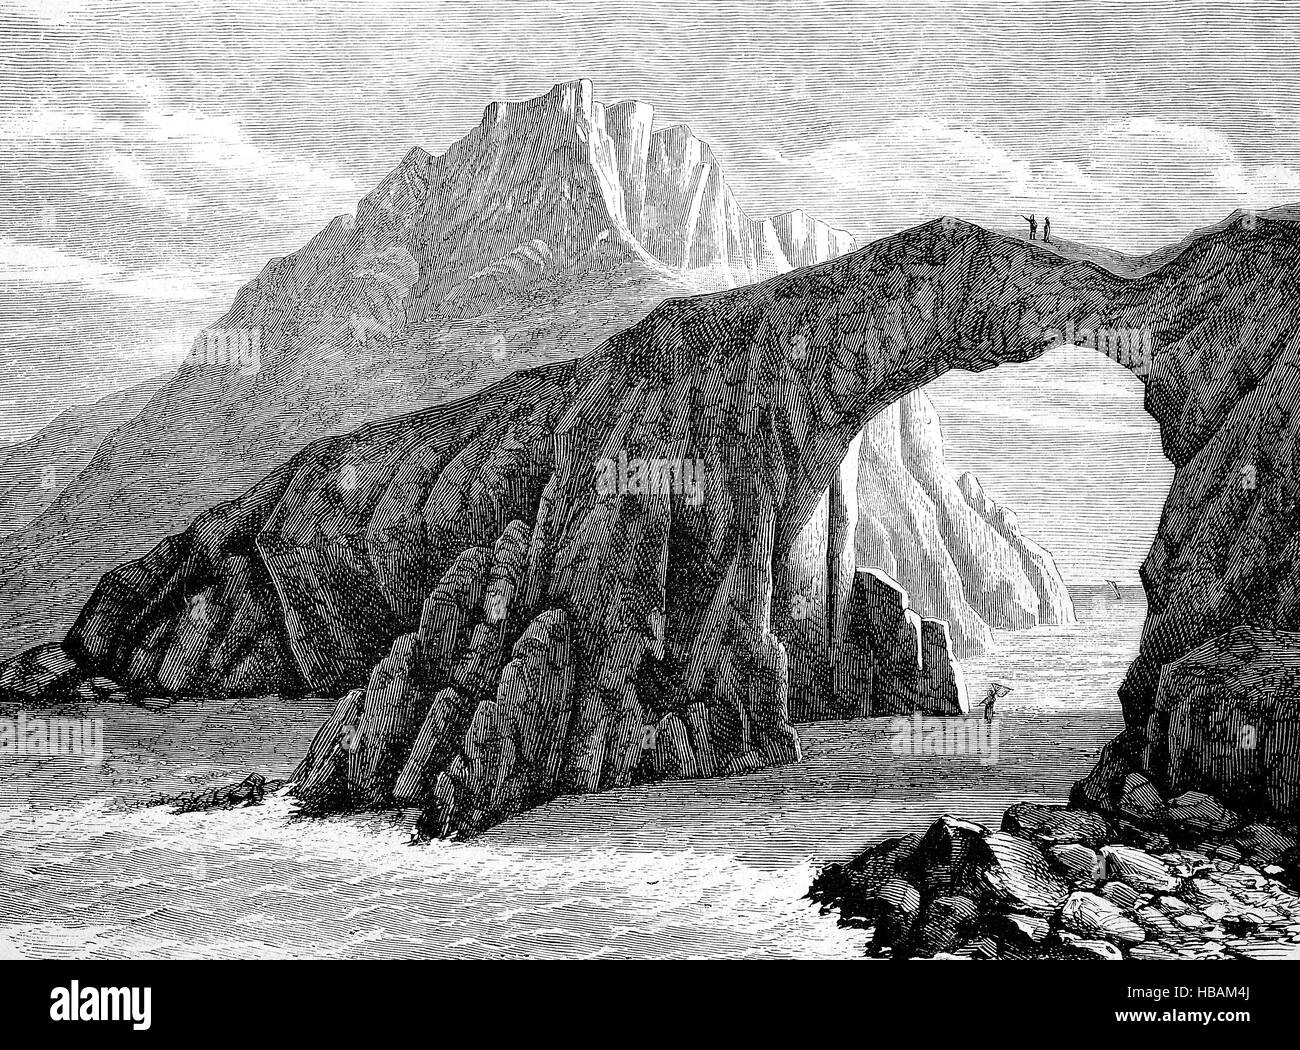 the rock arche of Ushant, Ouessant, an island at the south-western end of the English Channel which marks the north-westernmost point of metropolitan France, hictorical illustration from 1880 Stock Photo